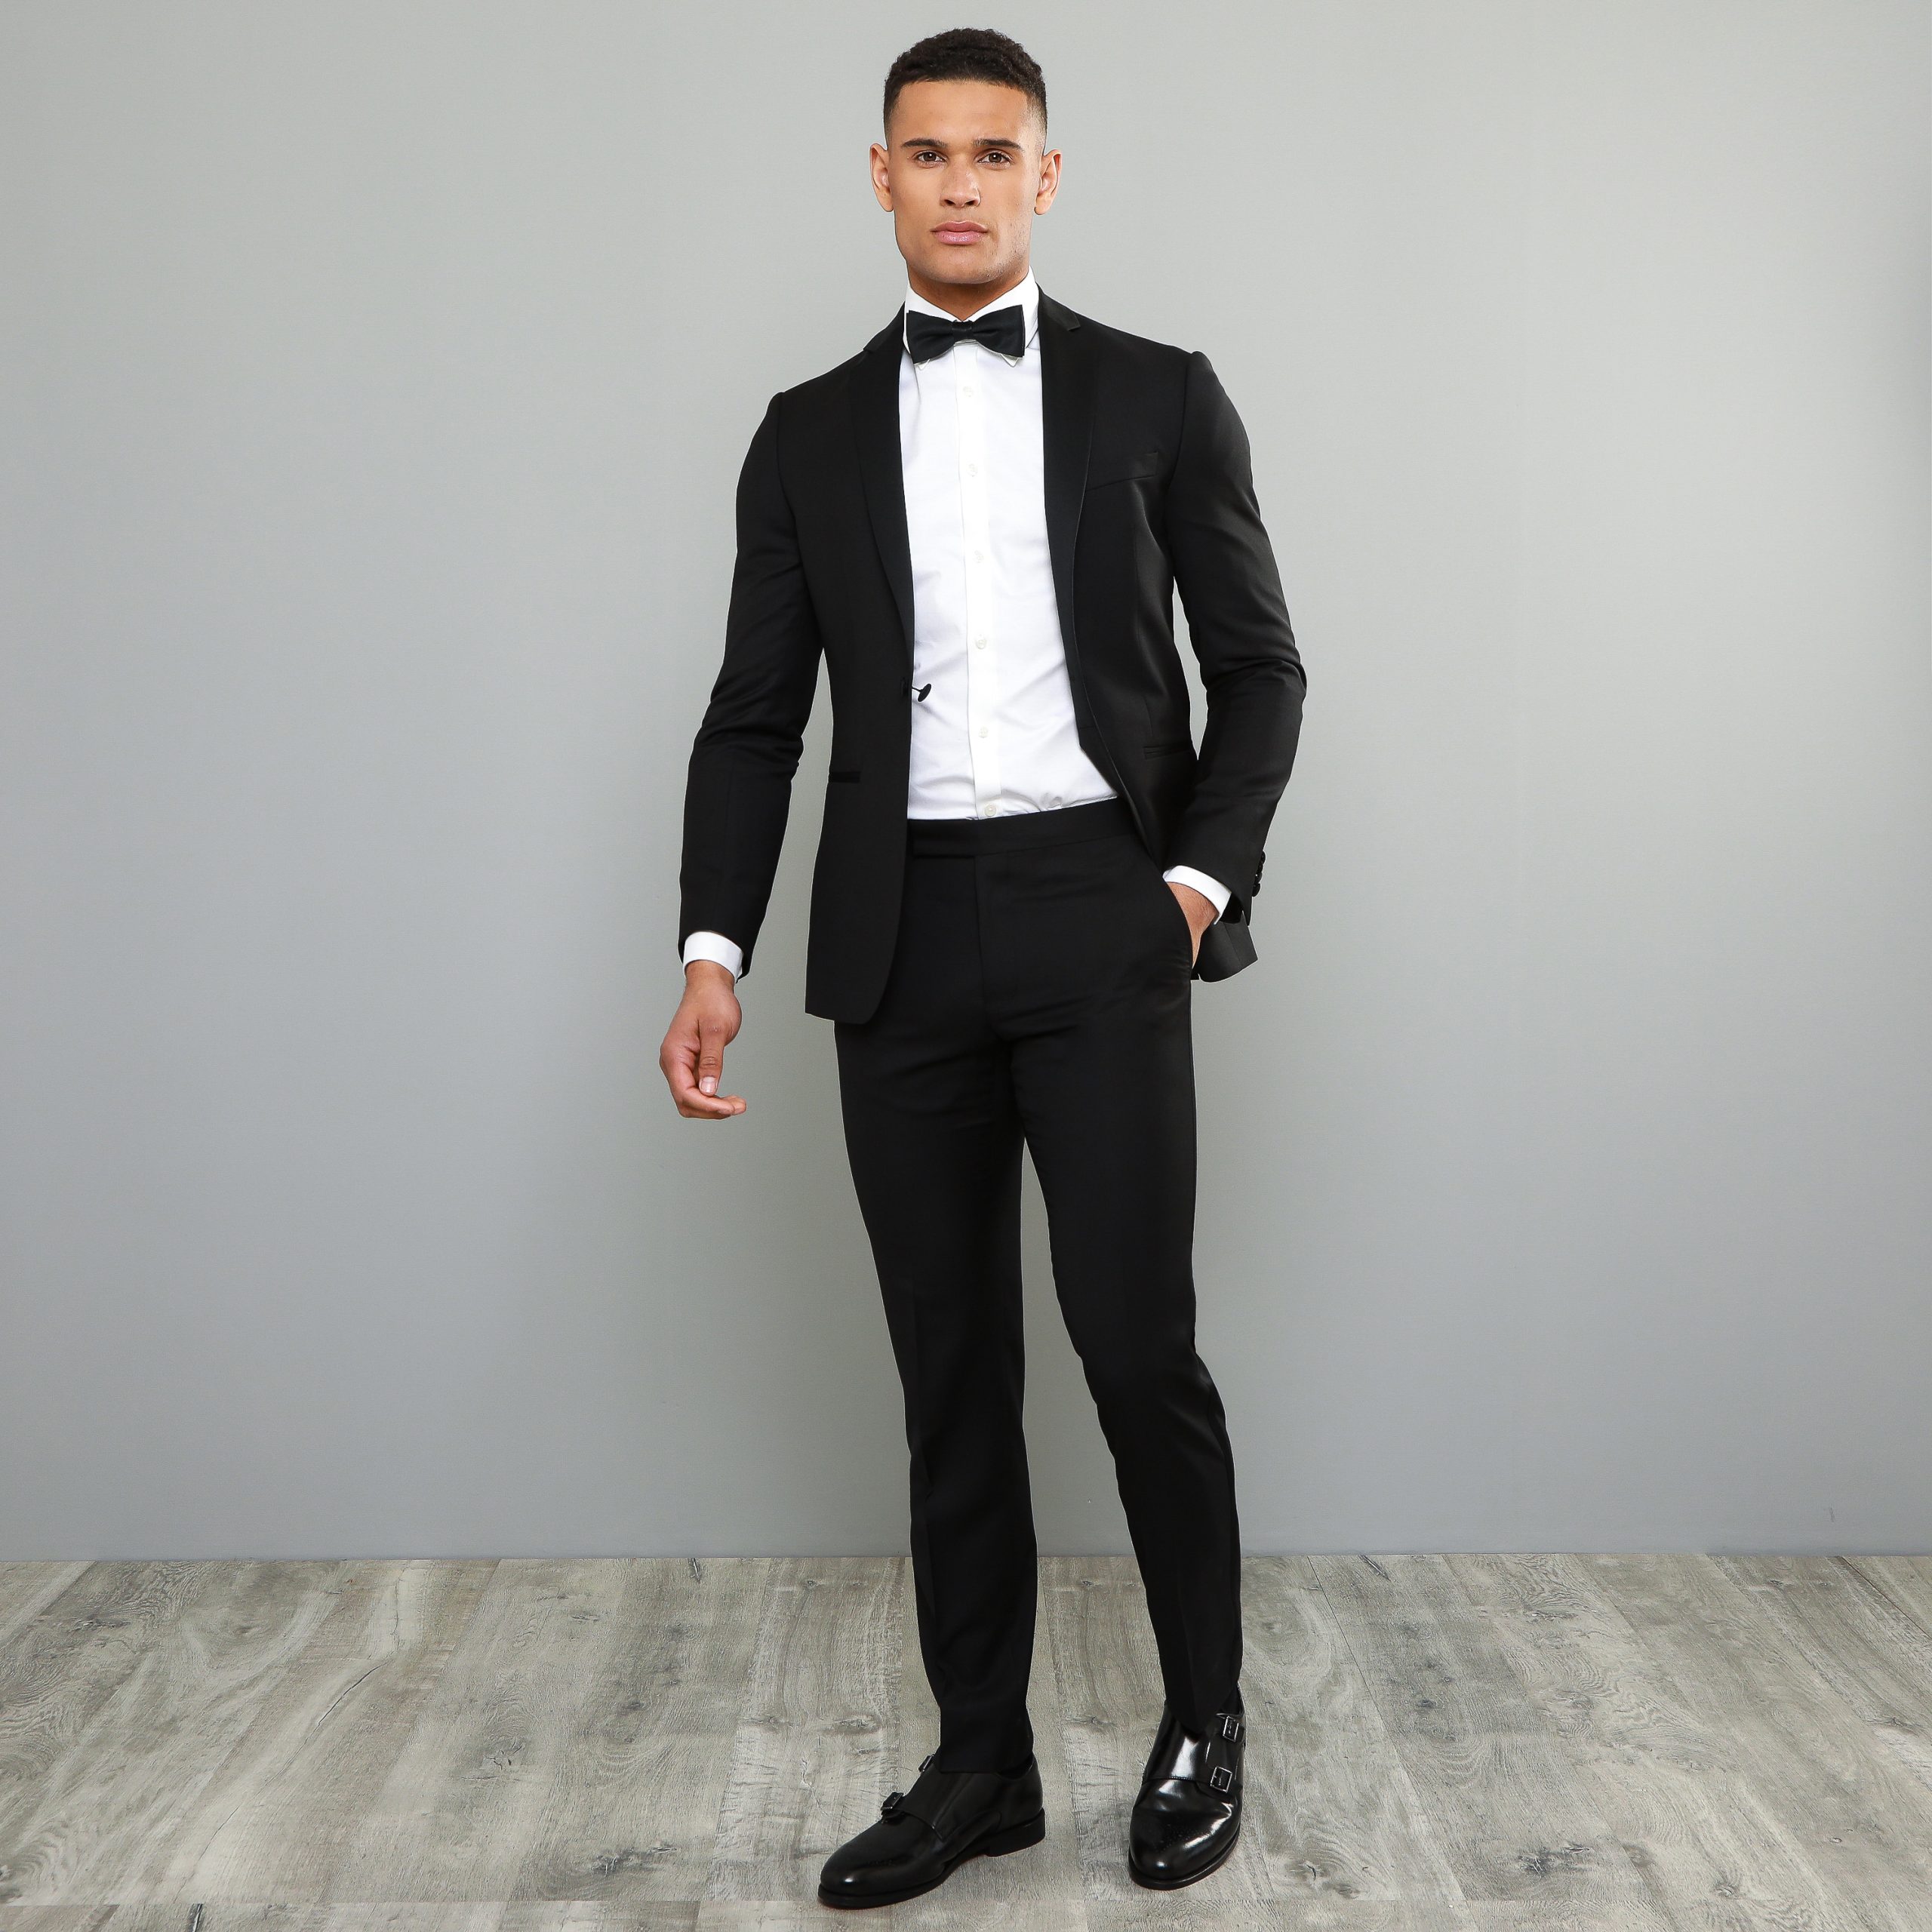 The Best Colour Combinations For Styling Your Groomsmen - Wedding Journal